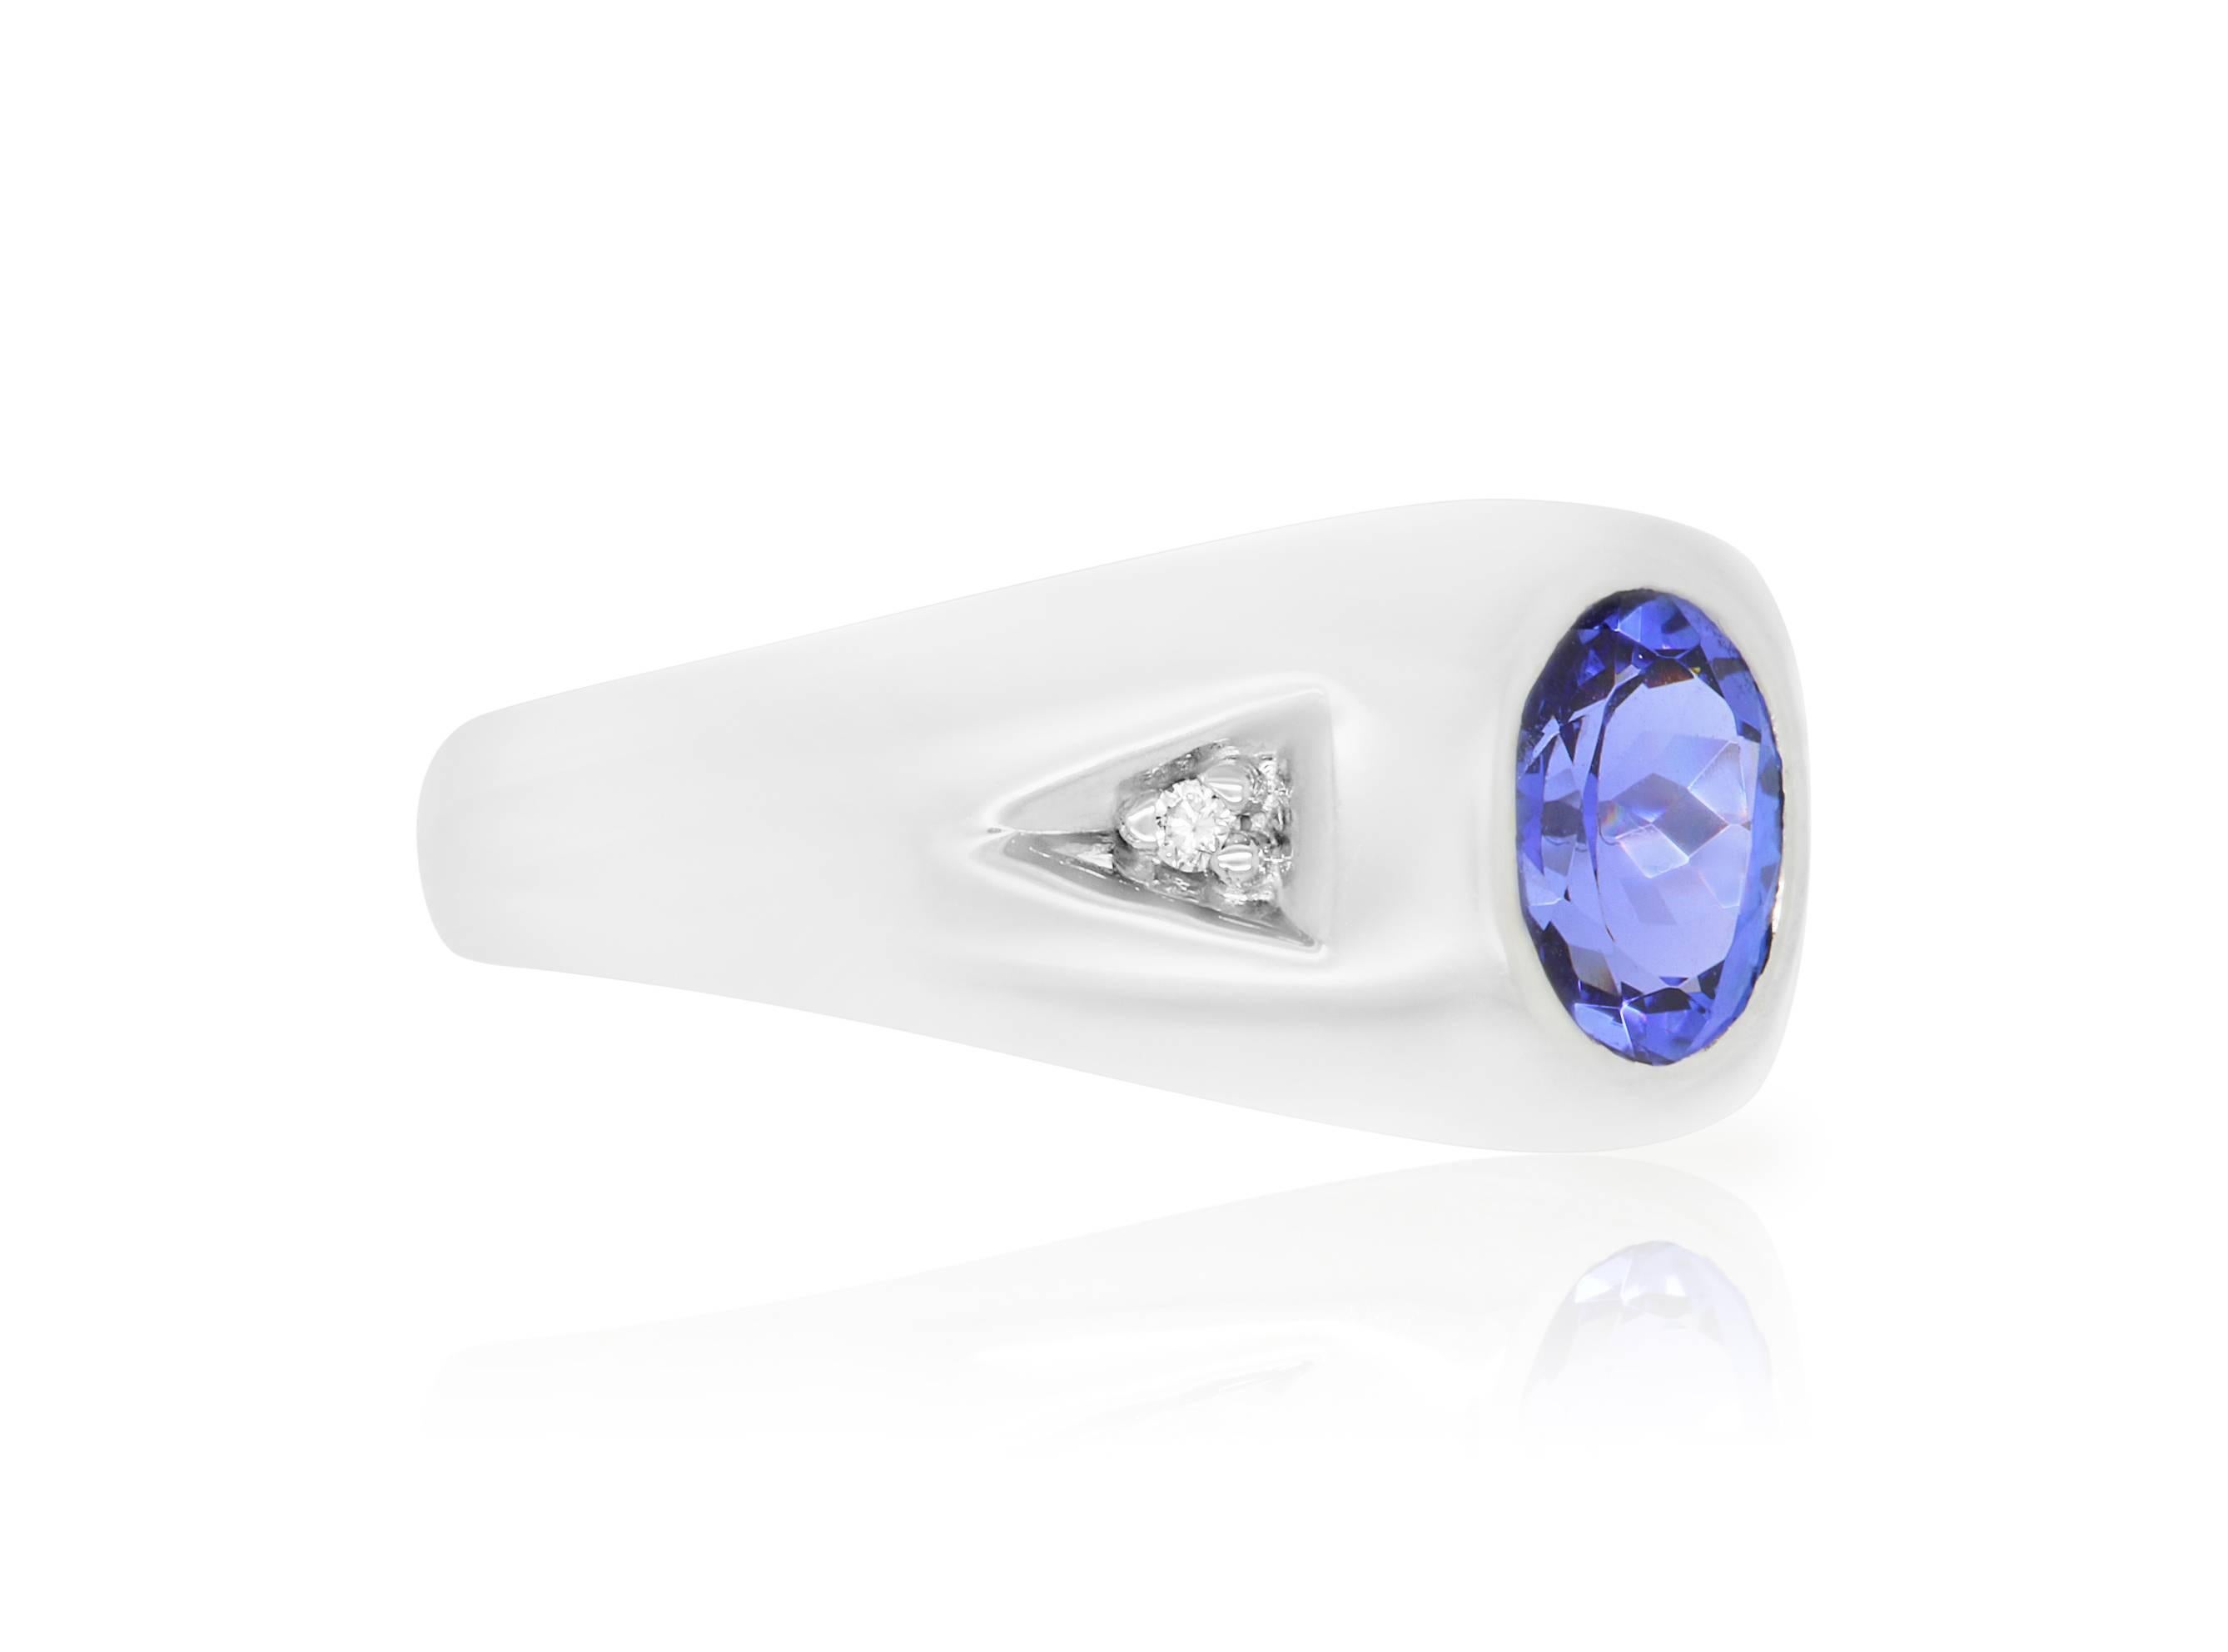 This 14k White Gold setting is a perfect fit for our 1.39 Carat Tanzanite. Surrounded on either side with a white diamonds, this classy piece is a must have men's ring.    

Material: 14k White Gold
Gemstones: 1 Oval Tanzanite at 1.39 Carats - 8 x 6